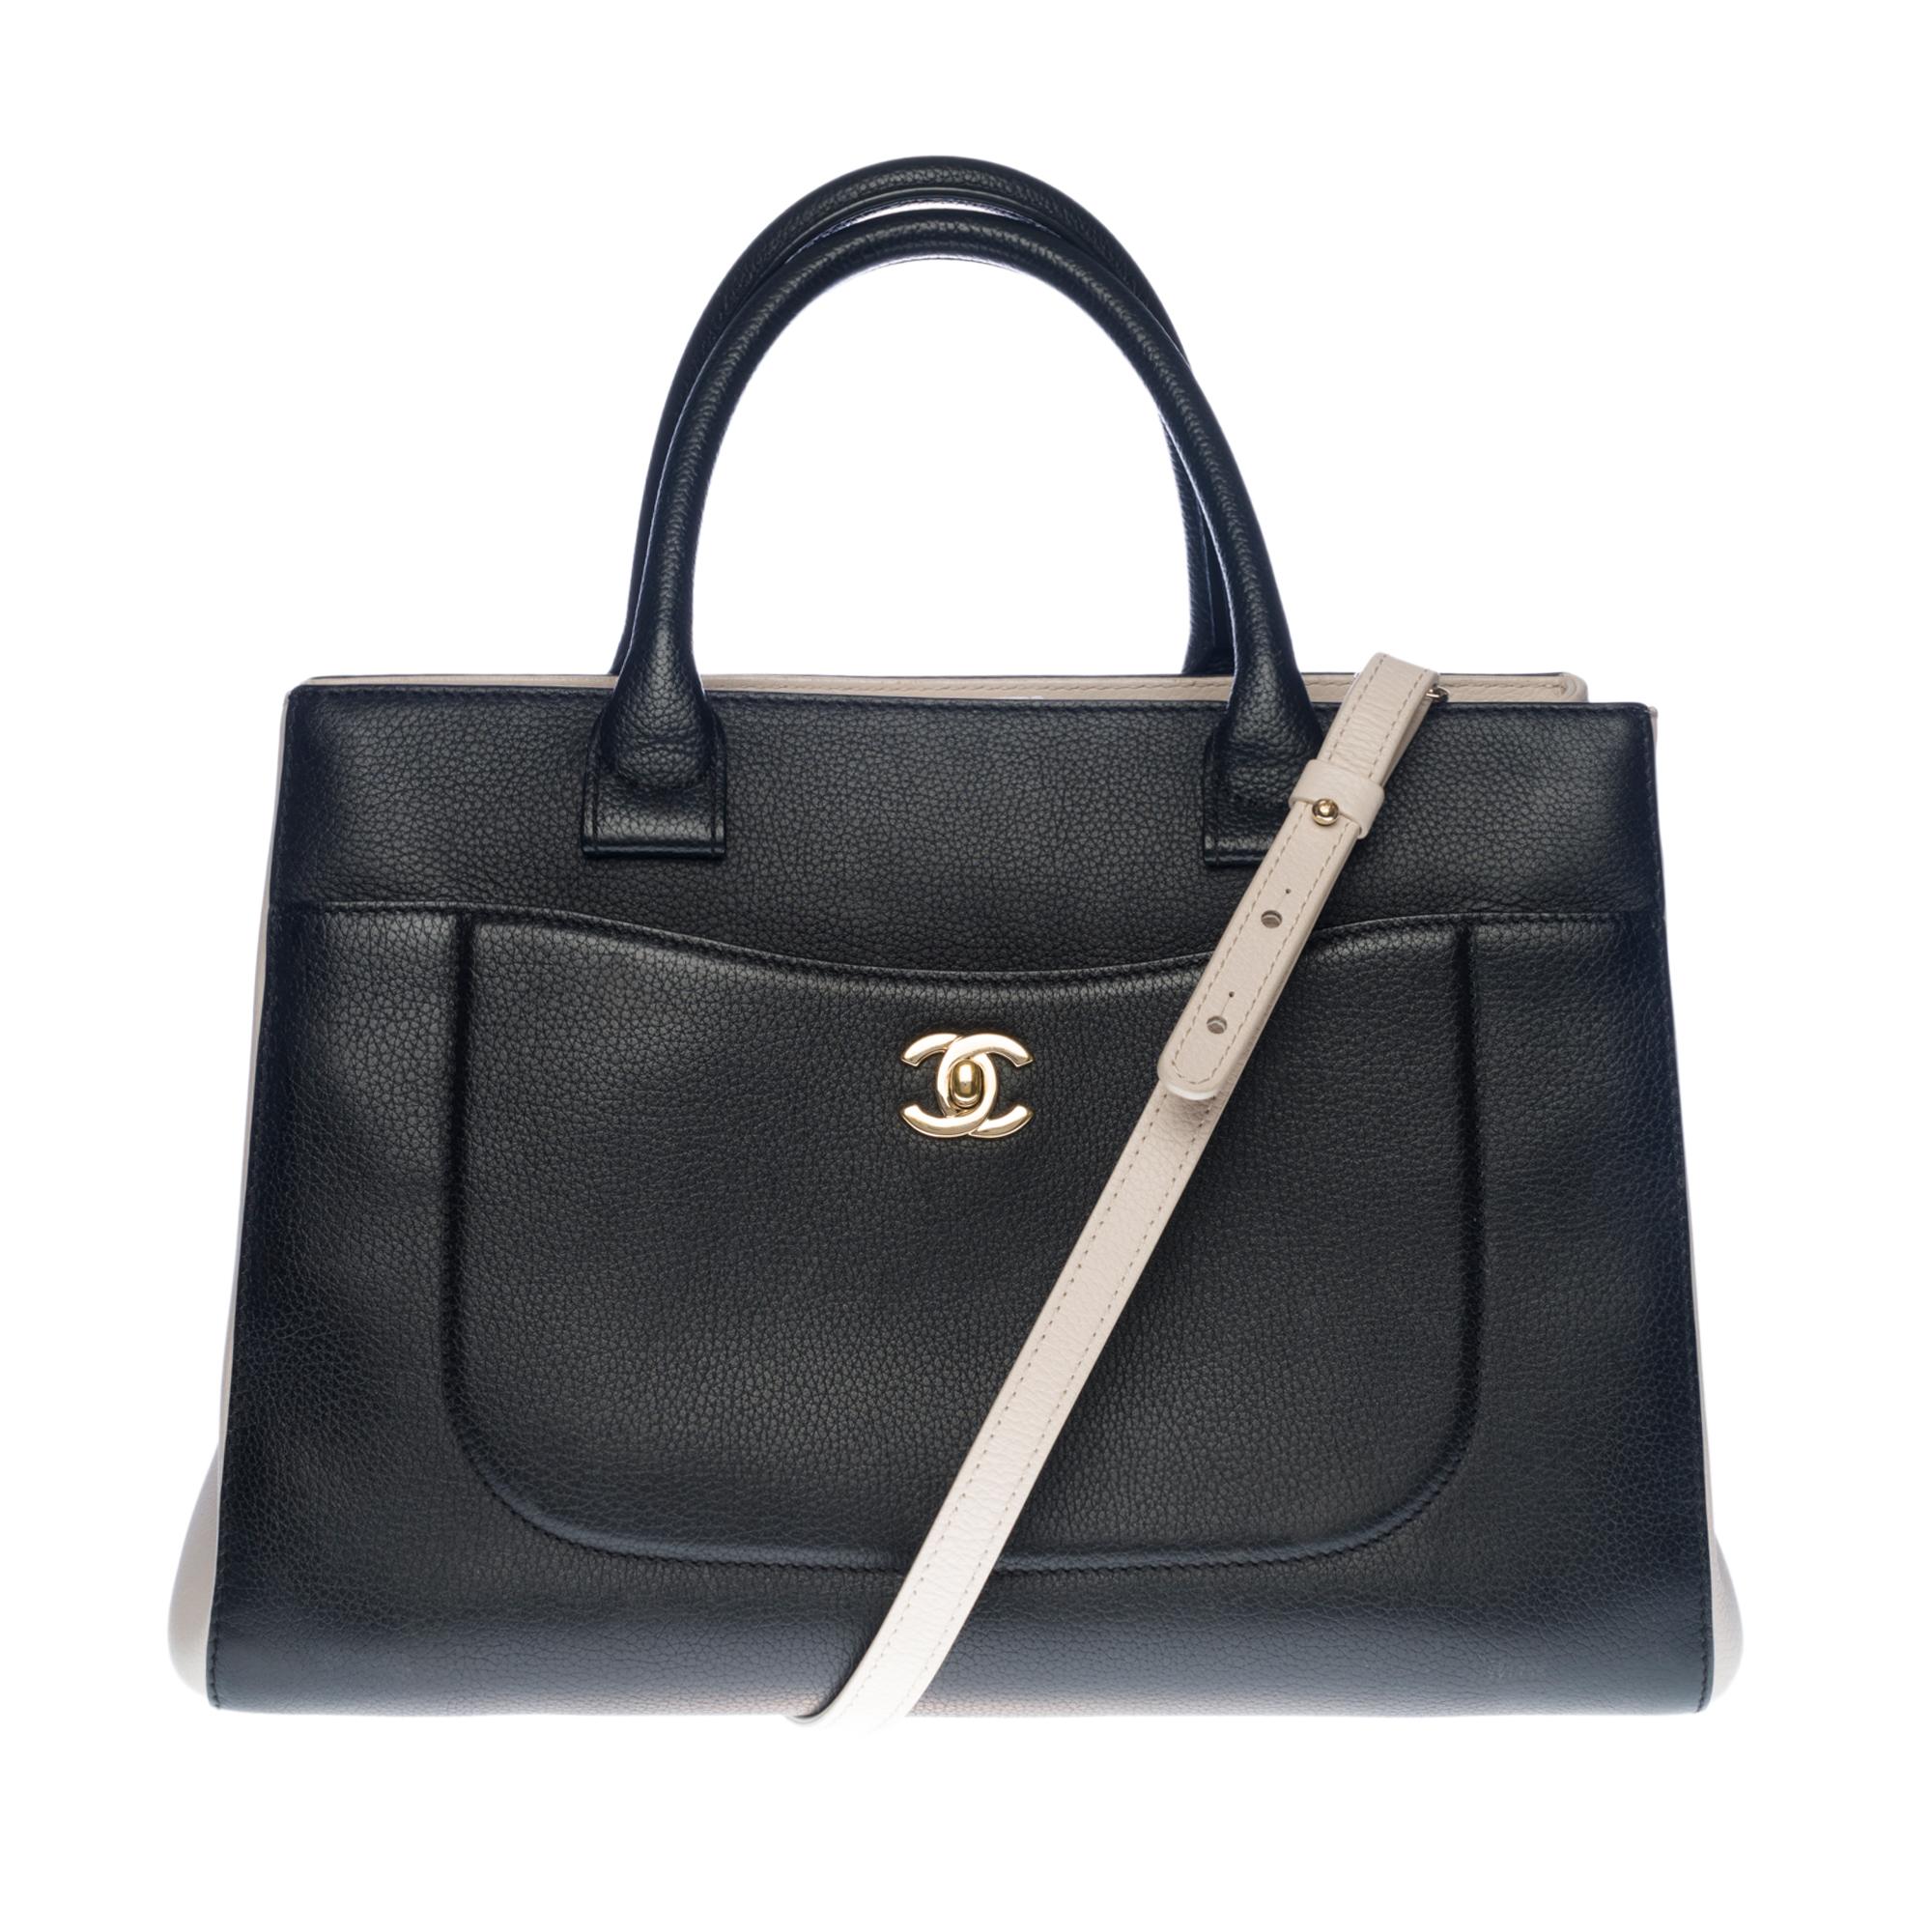 Beautiful Chanel Cabas Neo Executive Tote bag in black and cream grained leather, champagne metal hardware, double black leather handles and a removable and adjustable cream leather shoulder strap allowing for hand, shoulder and shoulder strap